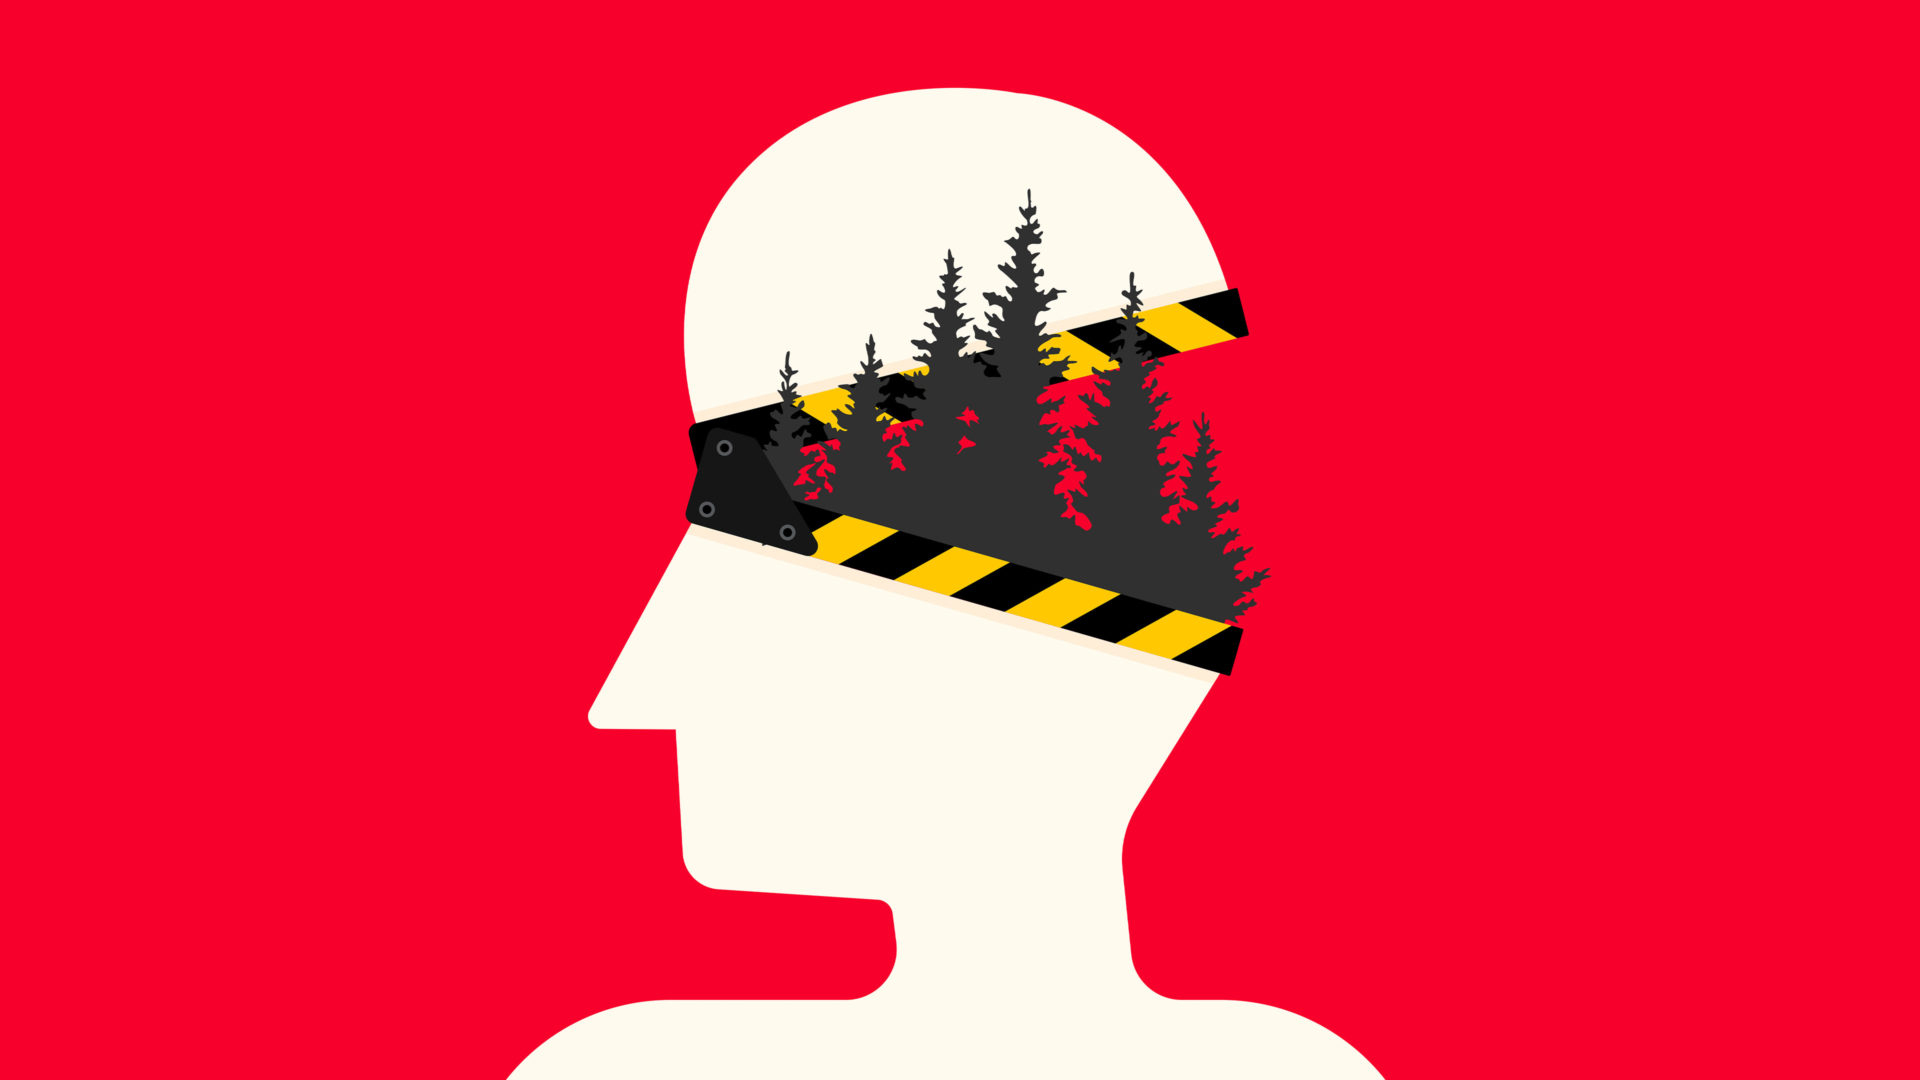 A graphic poster with a white silhouette of a human figure against a red background. The head is opened like a gate and inside it, there is a forest.